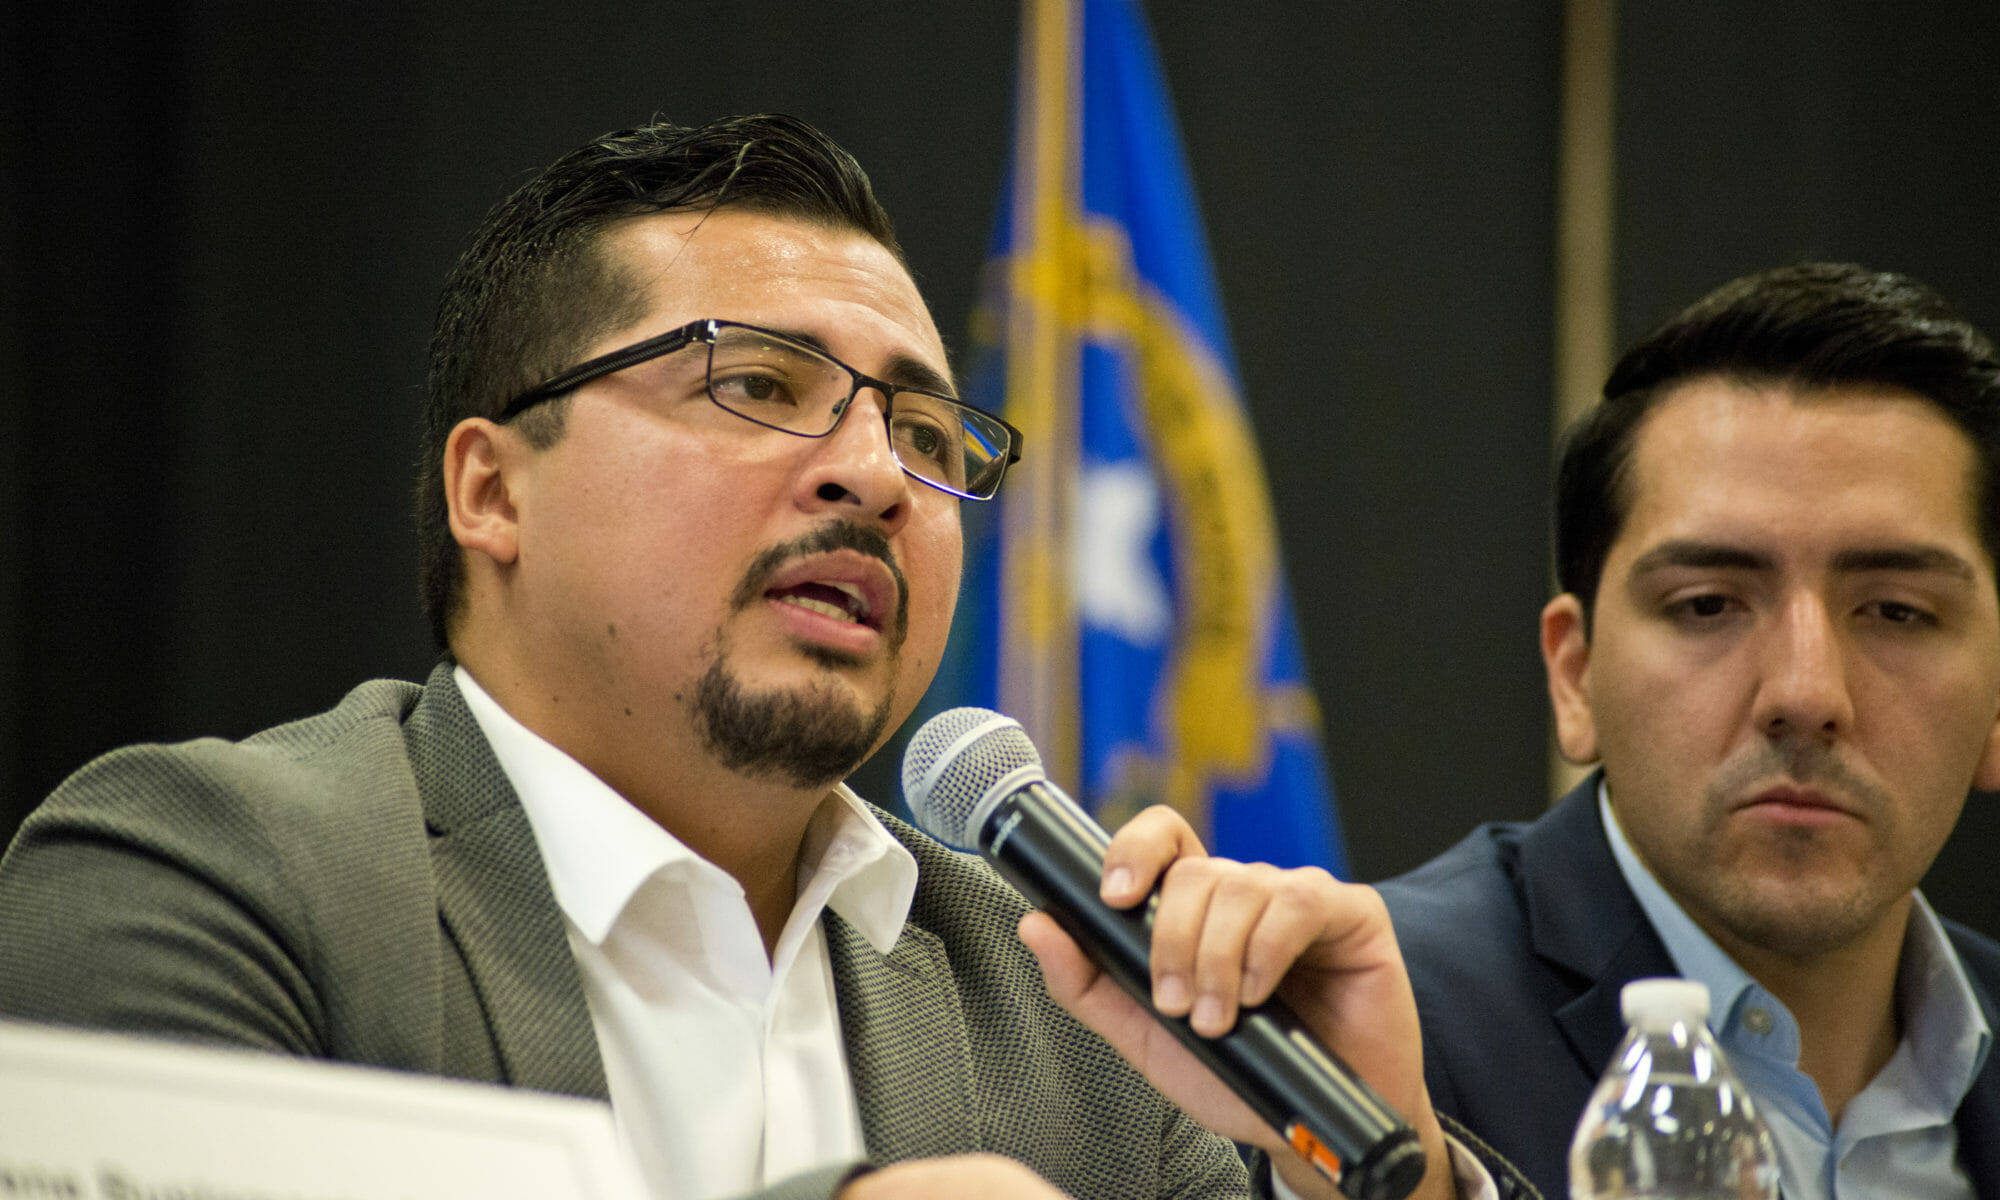 Nevada Assemblyman Edgar Flores speaking into microphone